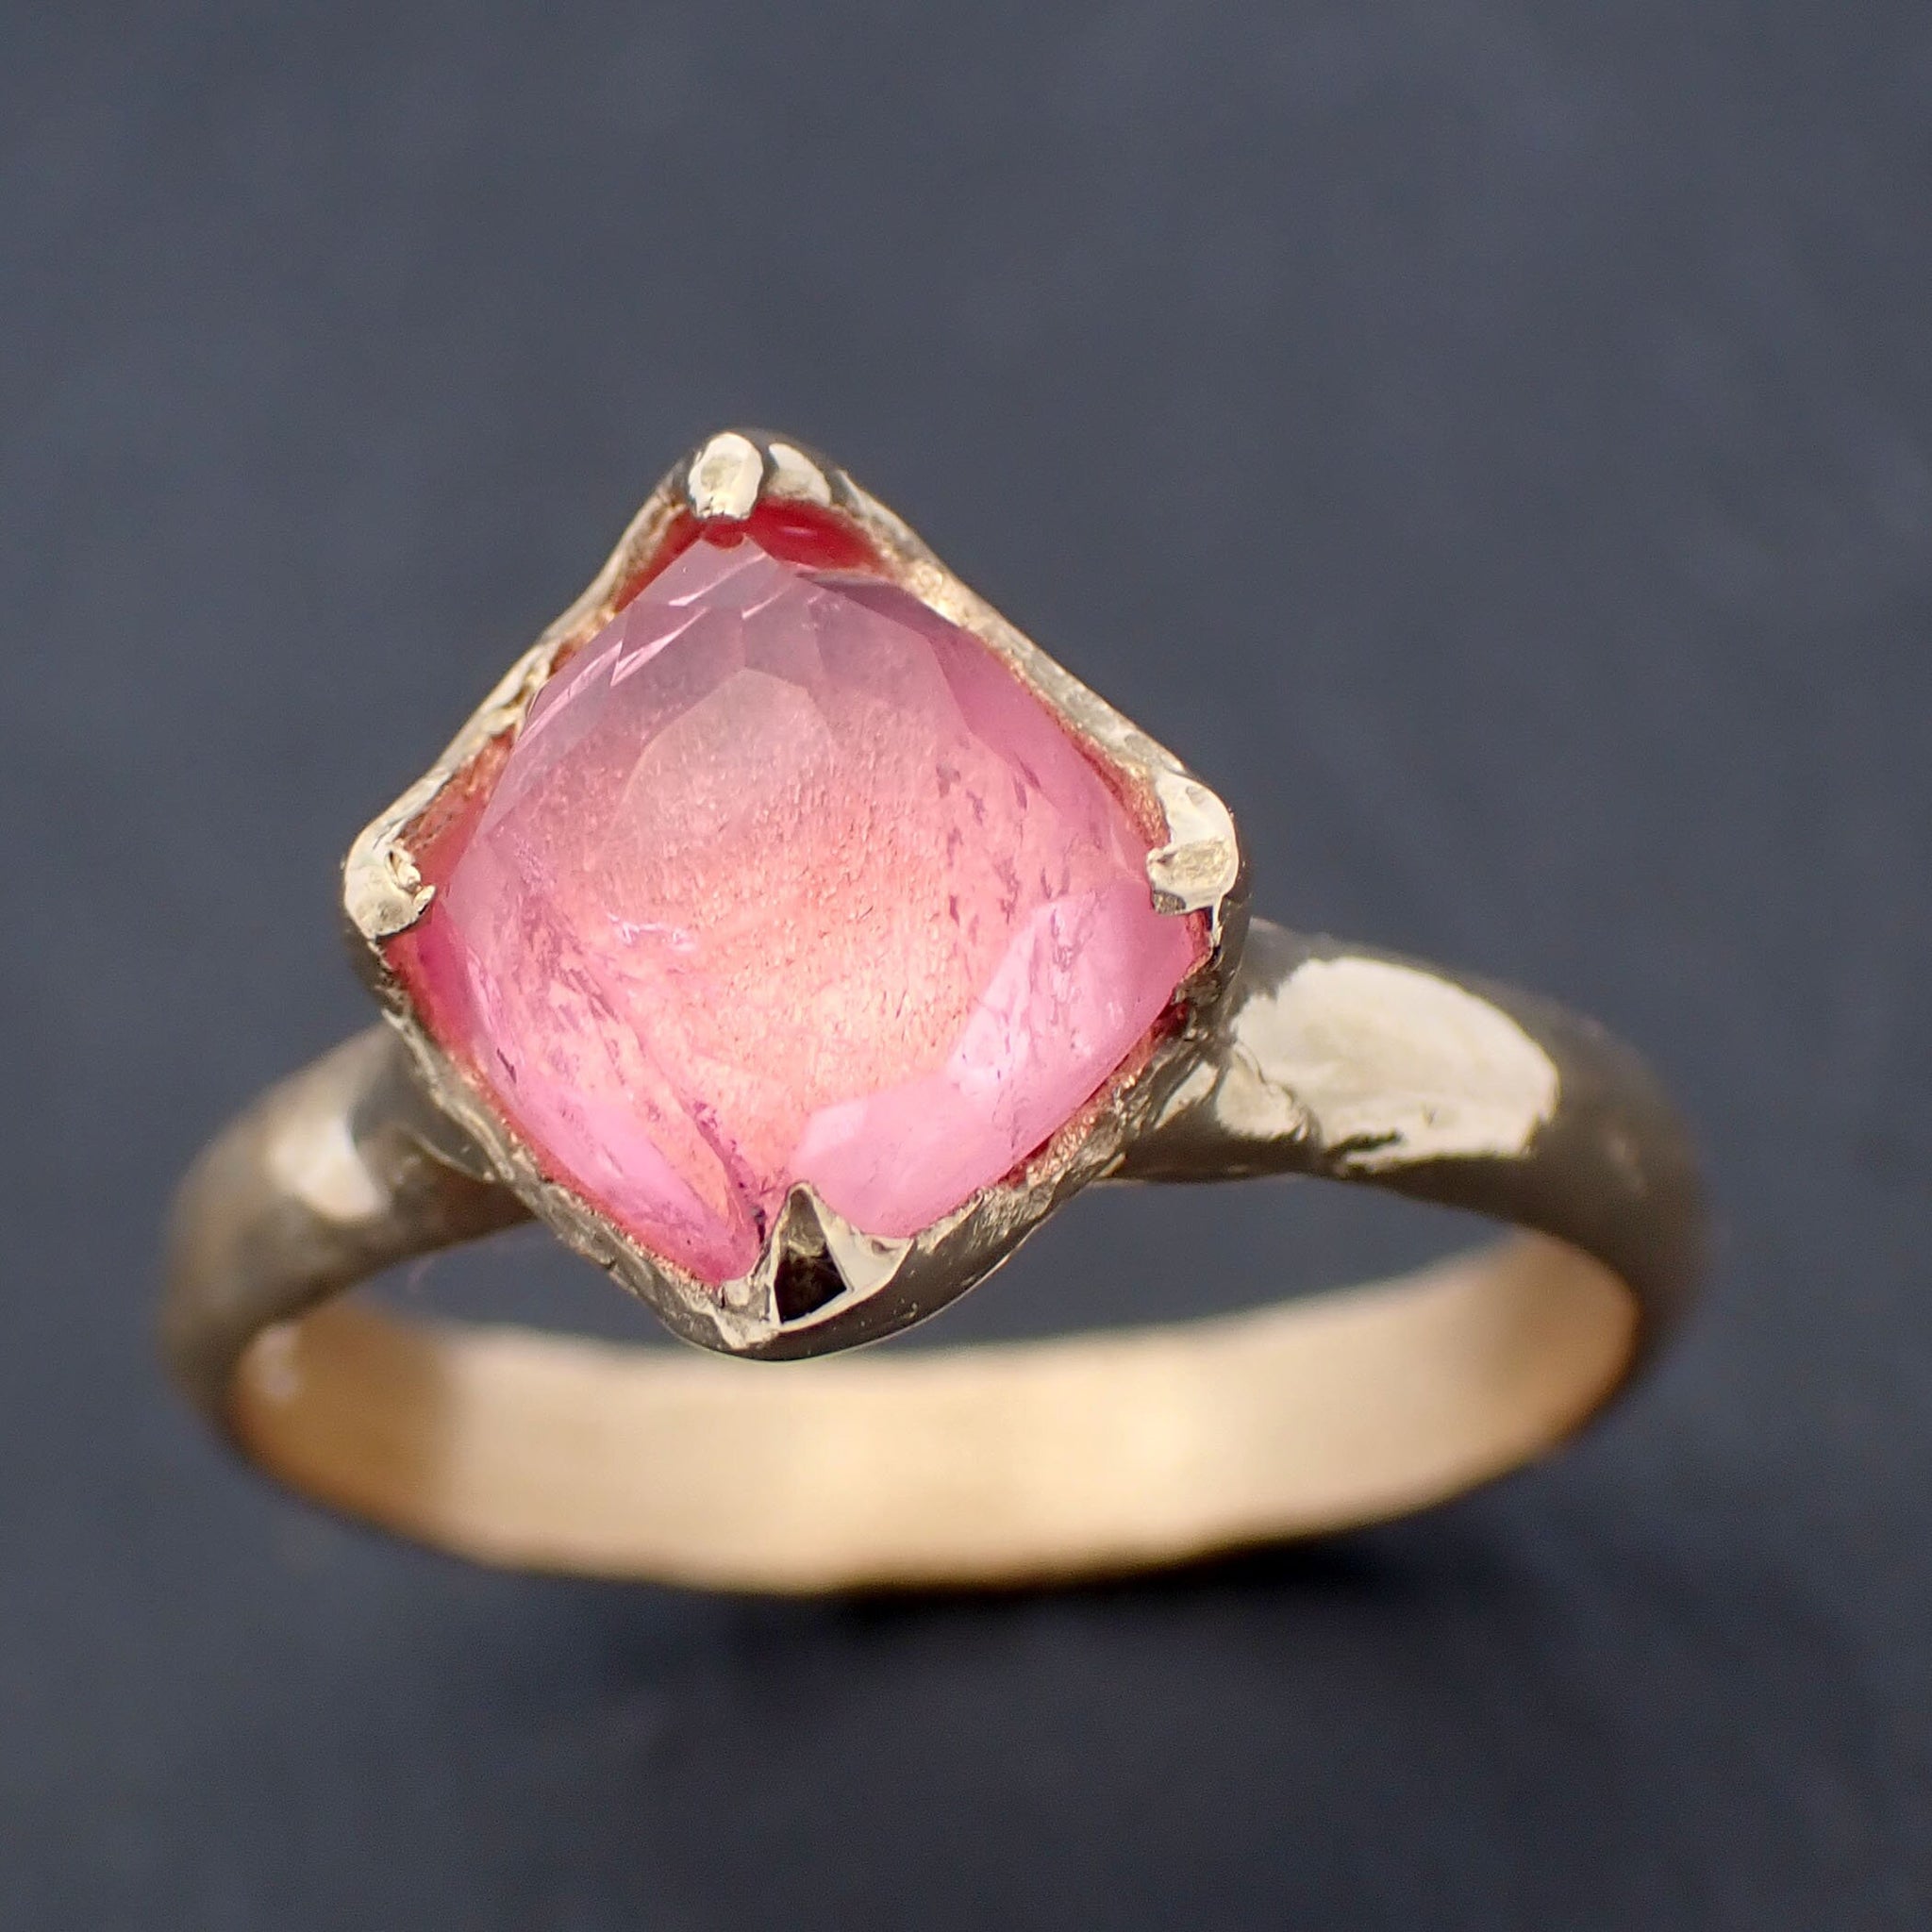 Fancy cut pink Tourmaline Gold Ring Gemstone Solitaire recycled 18k yellow gold statement cocktail statement 3444